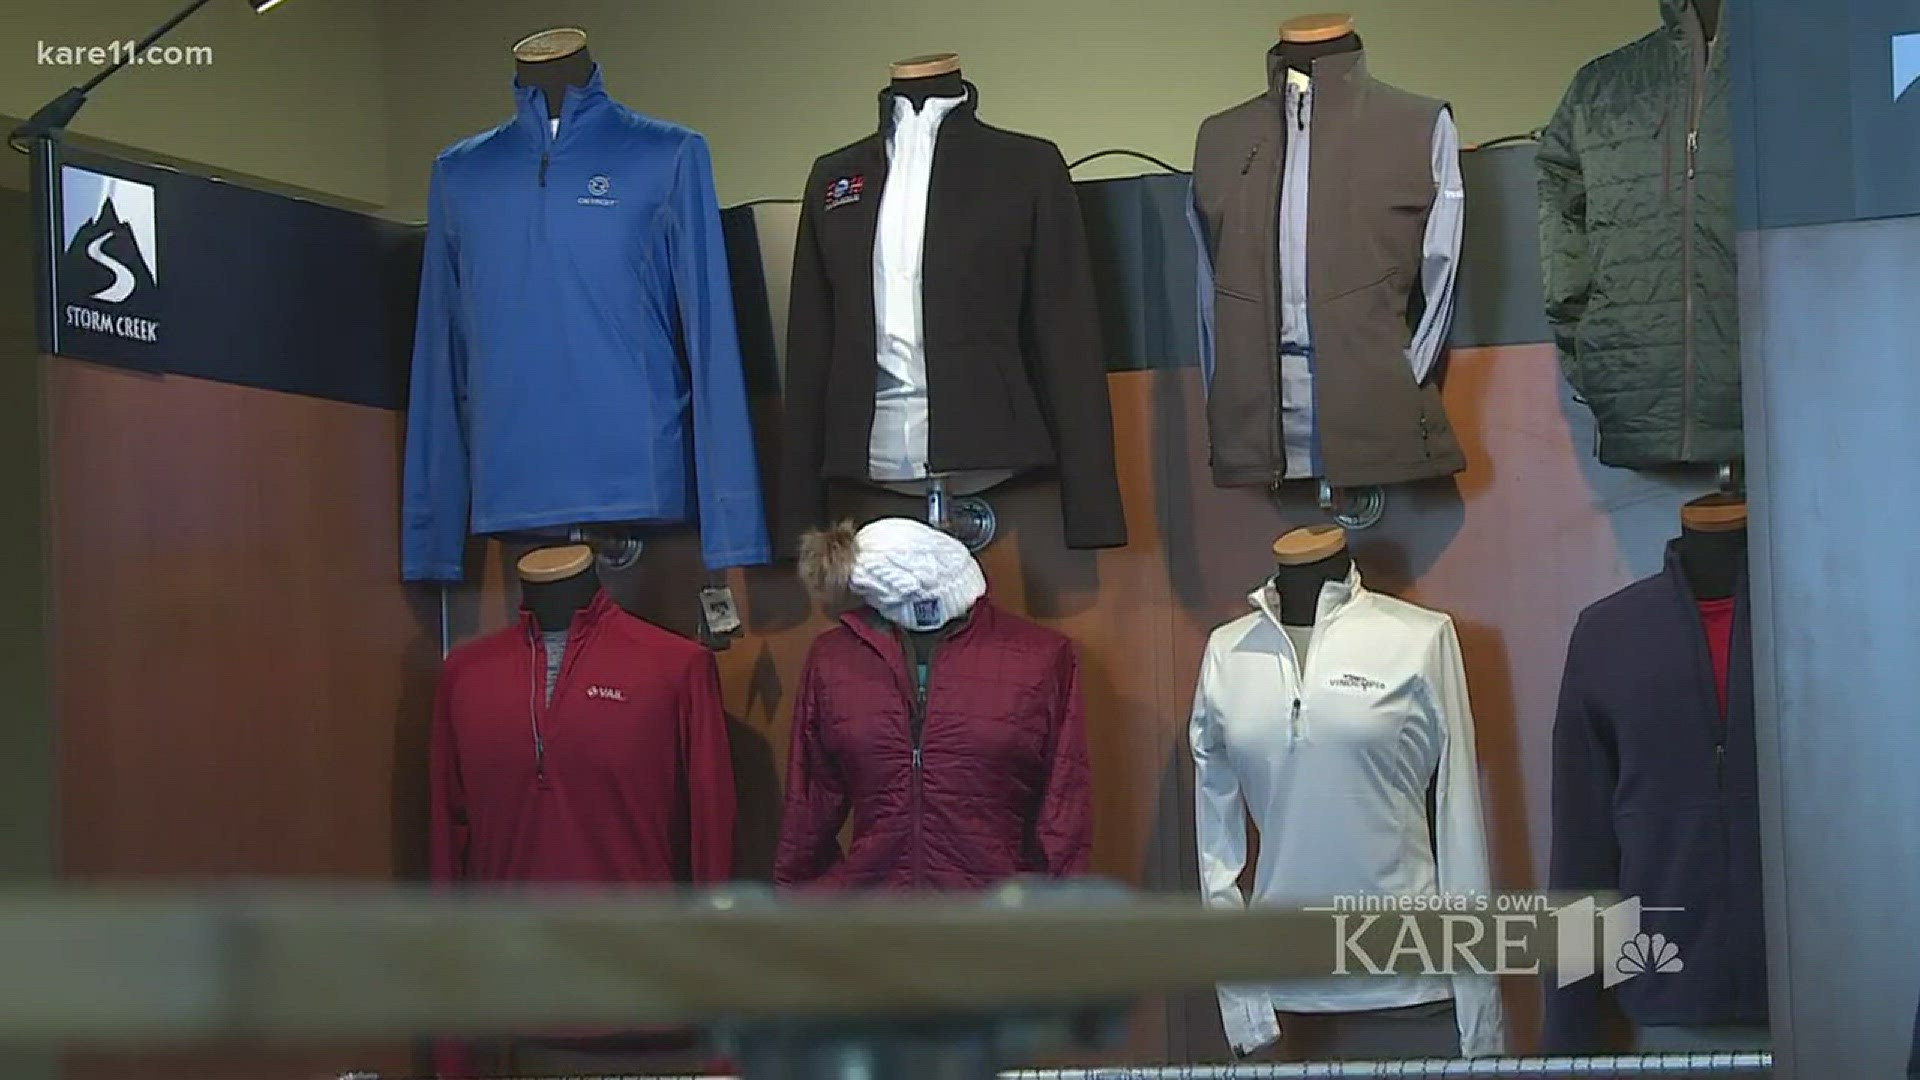 Sponsored segment: Storm Creek delivers the perfect outerwear for the Bold North.